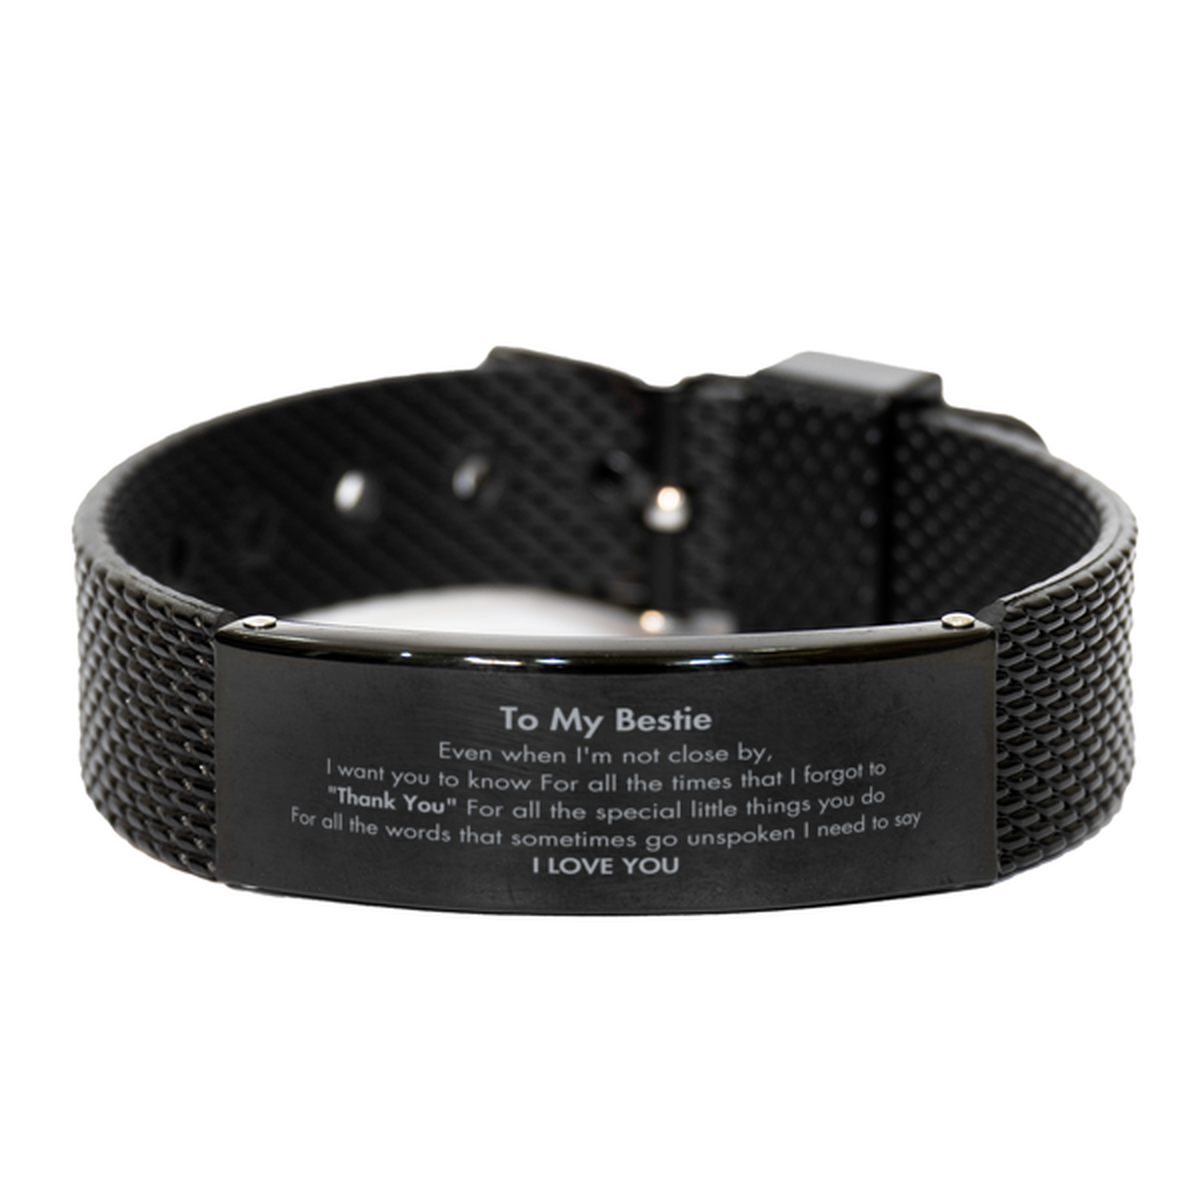 Thank You Gifts for Bestie, Keepsake Black Shark Mesh Bracelet Gifts for Bestie Birthday Mother's day Father's Day Bestie For all the words That sometimes go unspoken I need to say I LOVE YOU